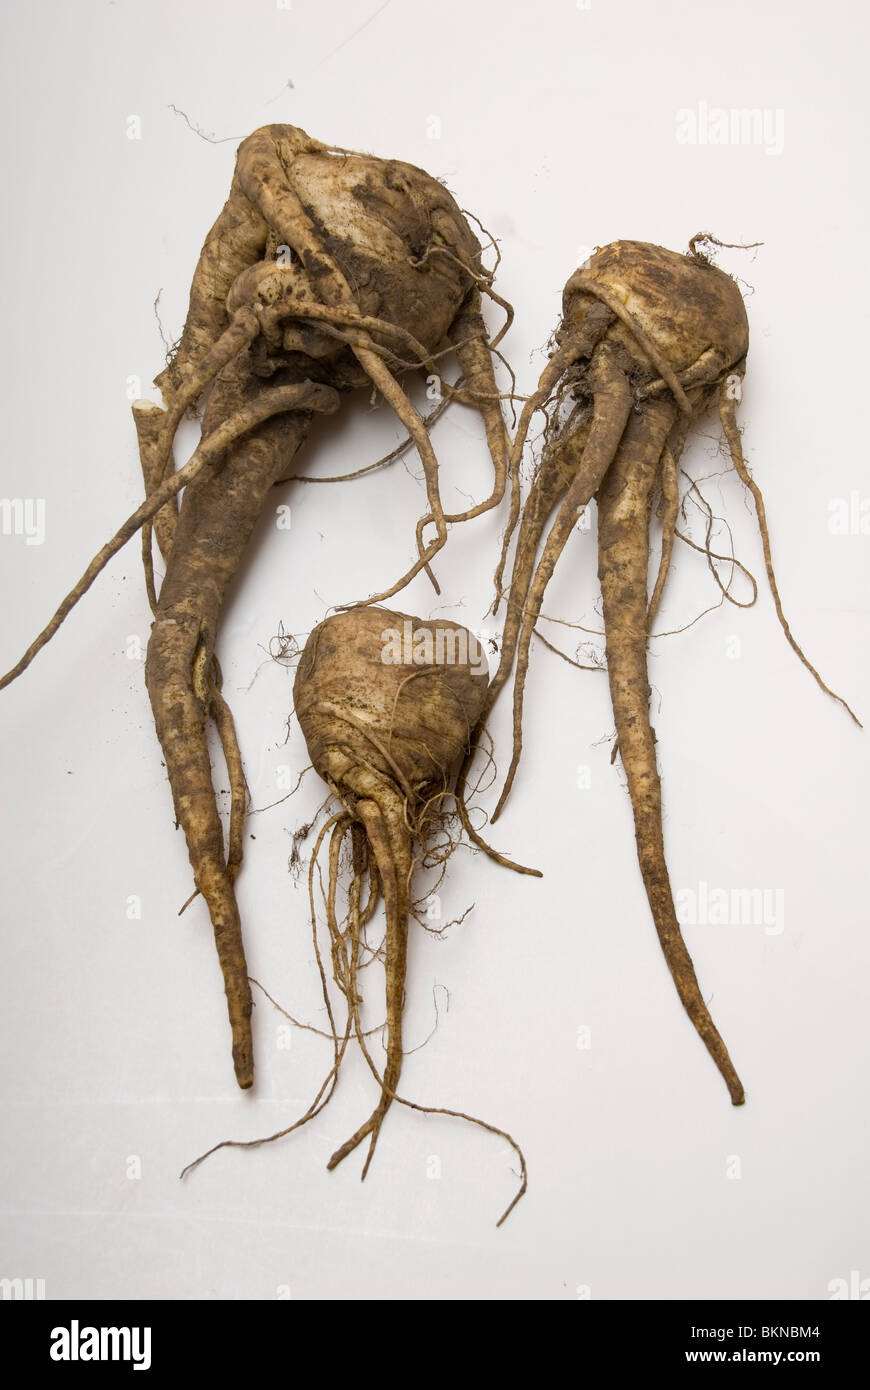 Home grown Parsnips with twisted multiple roots. Stock Photo